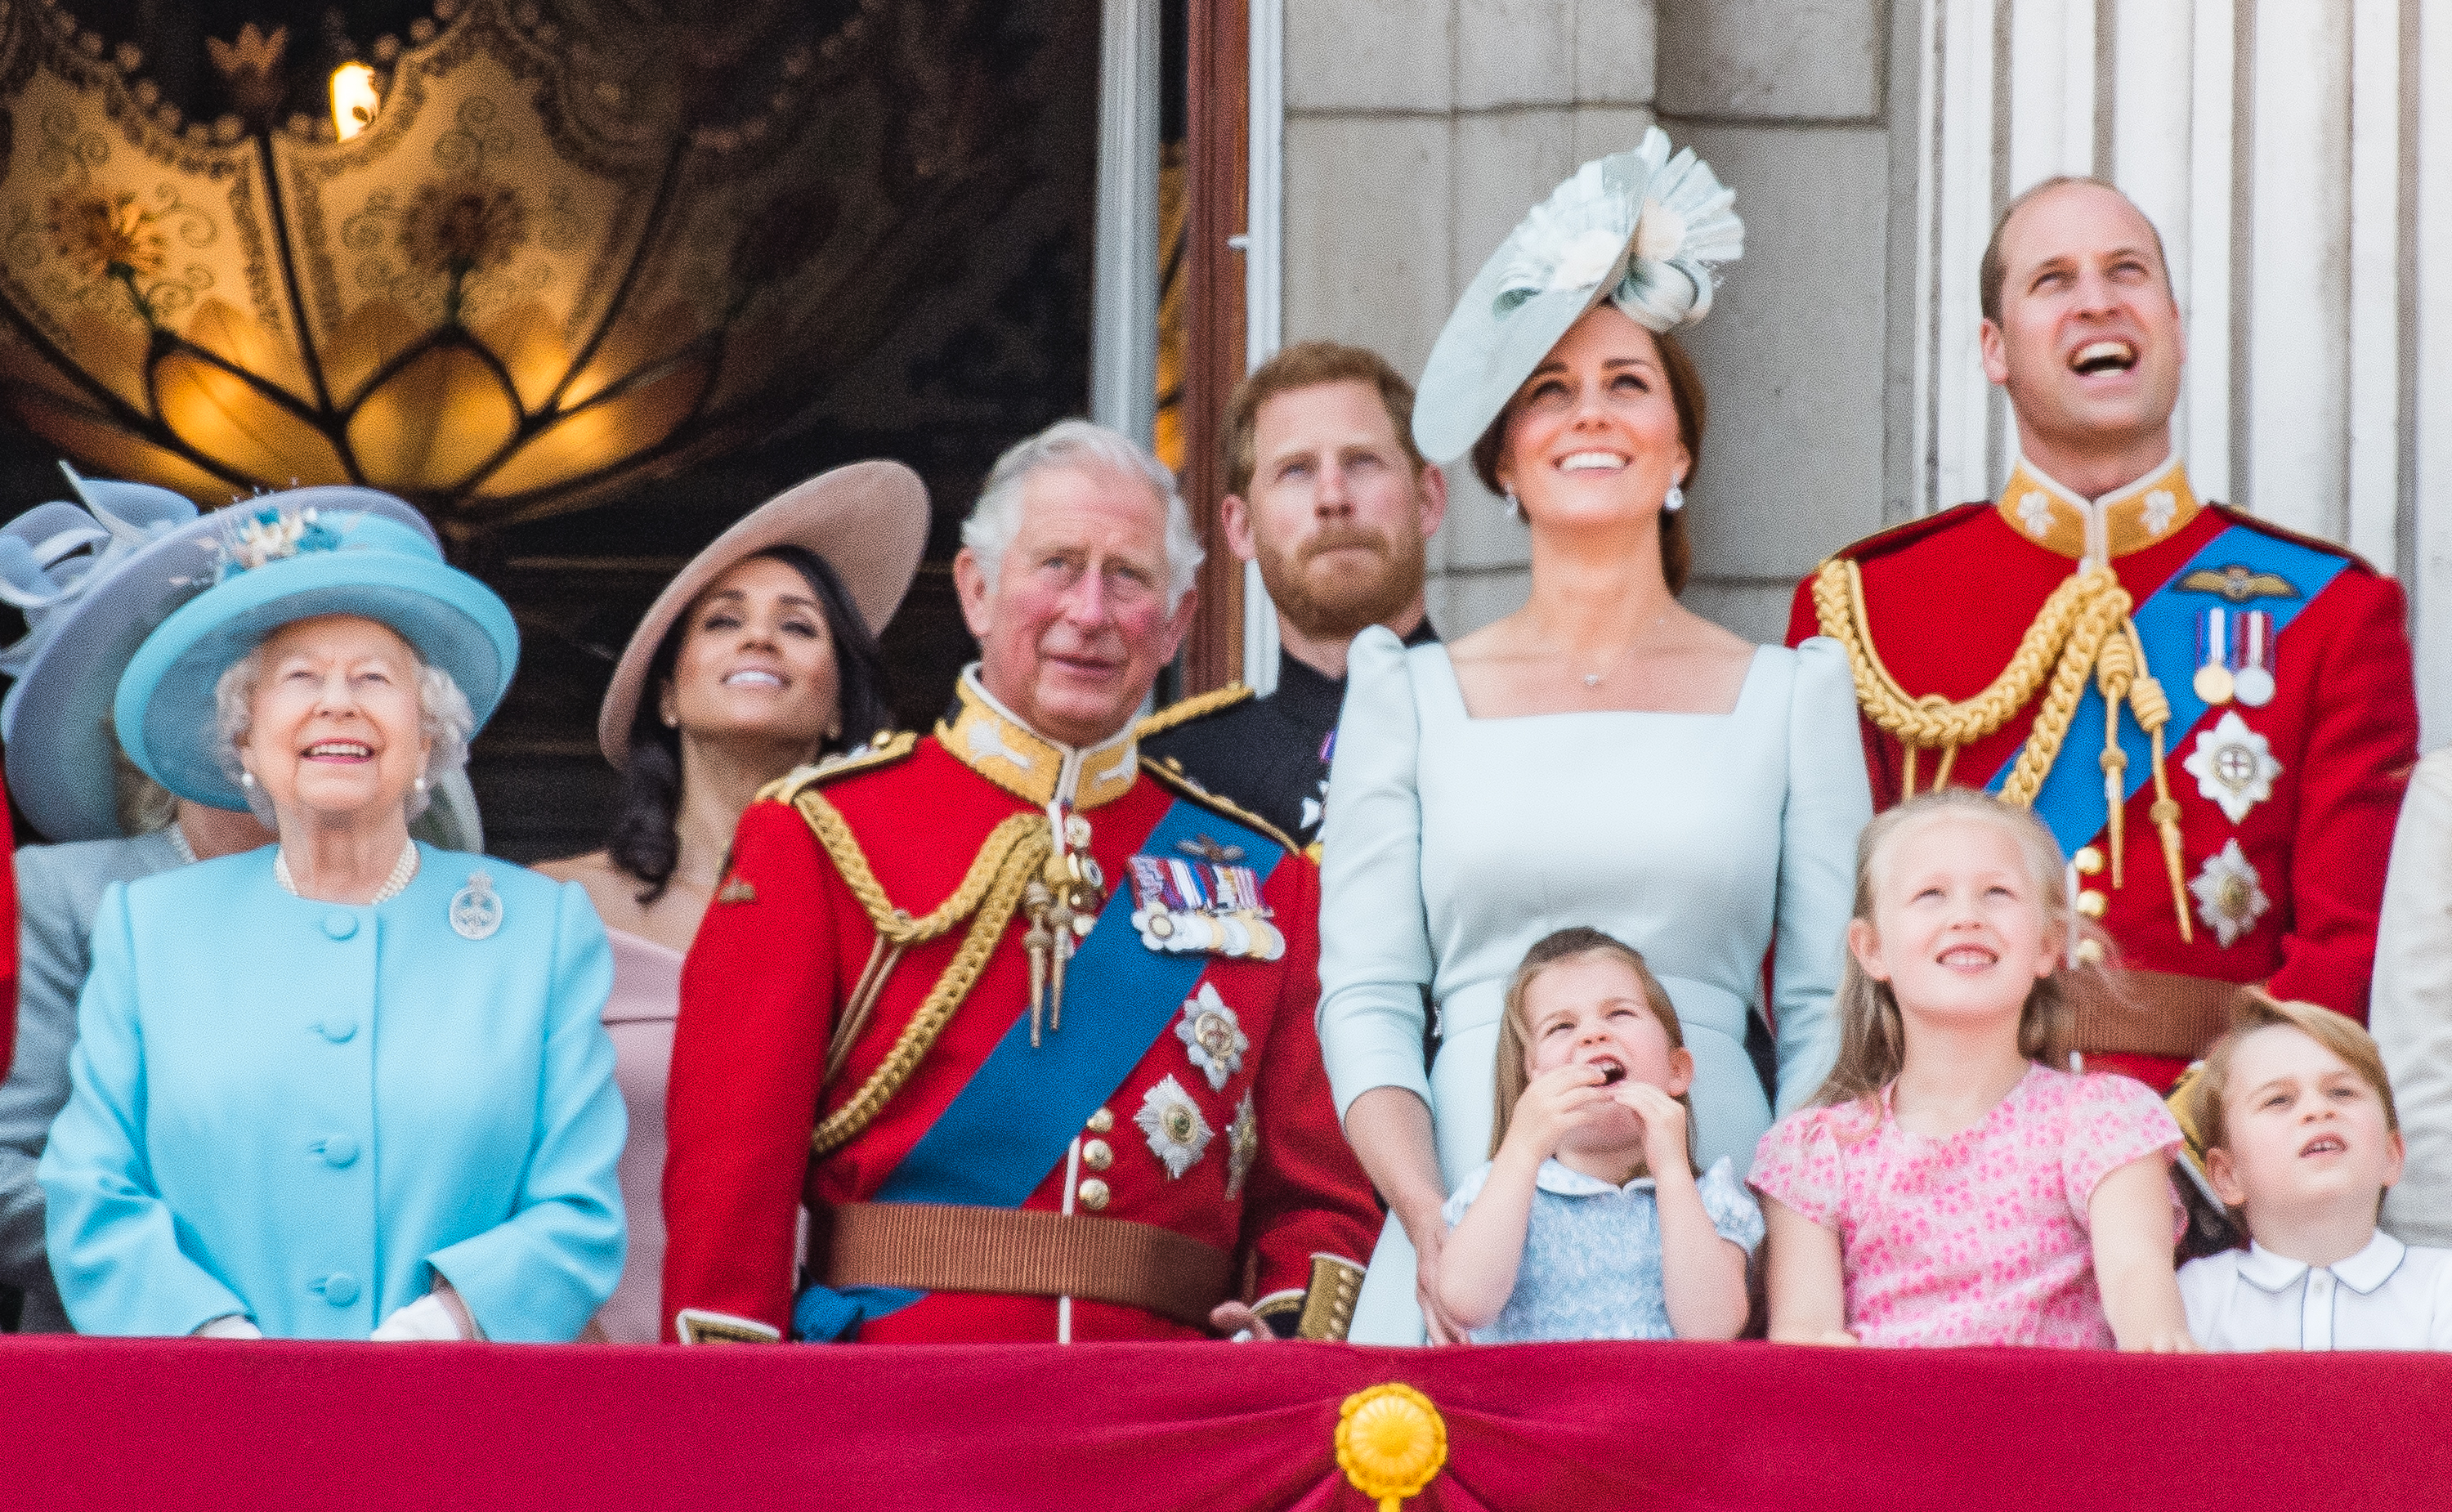 Queen Elizabeth II, Meghan, Prince Charles, Prince Harry, Catherine, Princess Charlotte, Savannah Phillips, Prince William, and Prince George on the balcony of Buckingham Palace on June 9, 2018 in London, England | Source: Getty Images